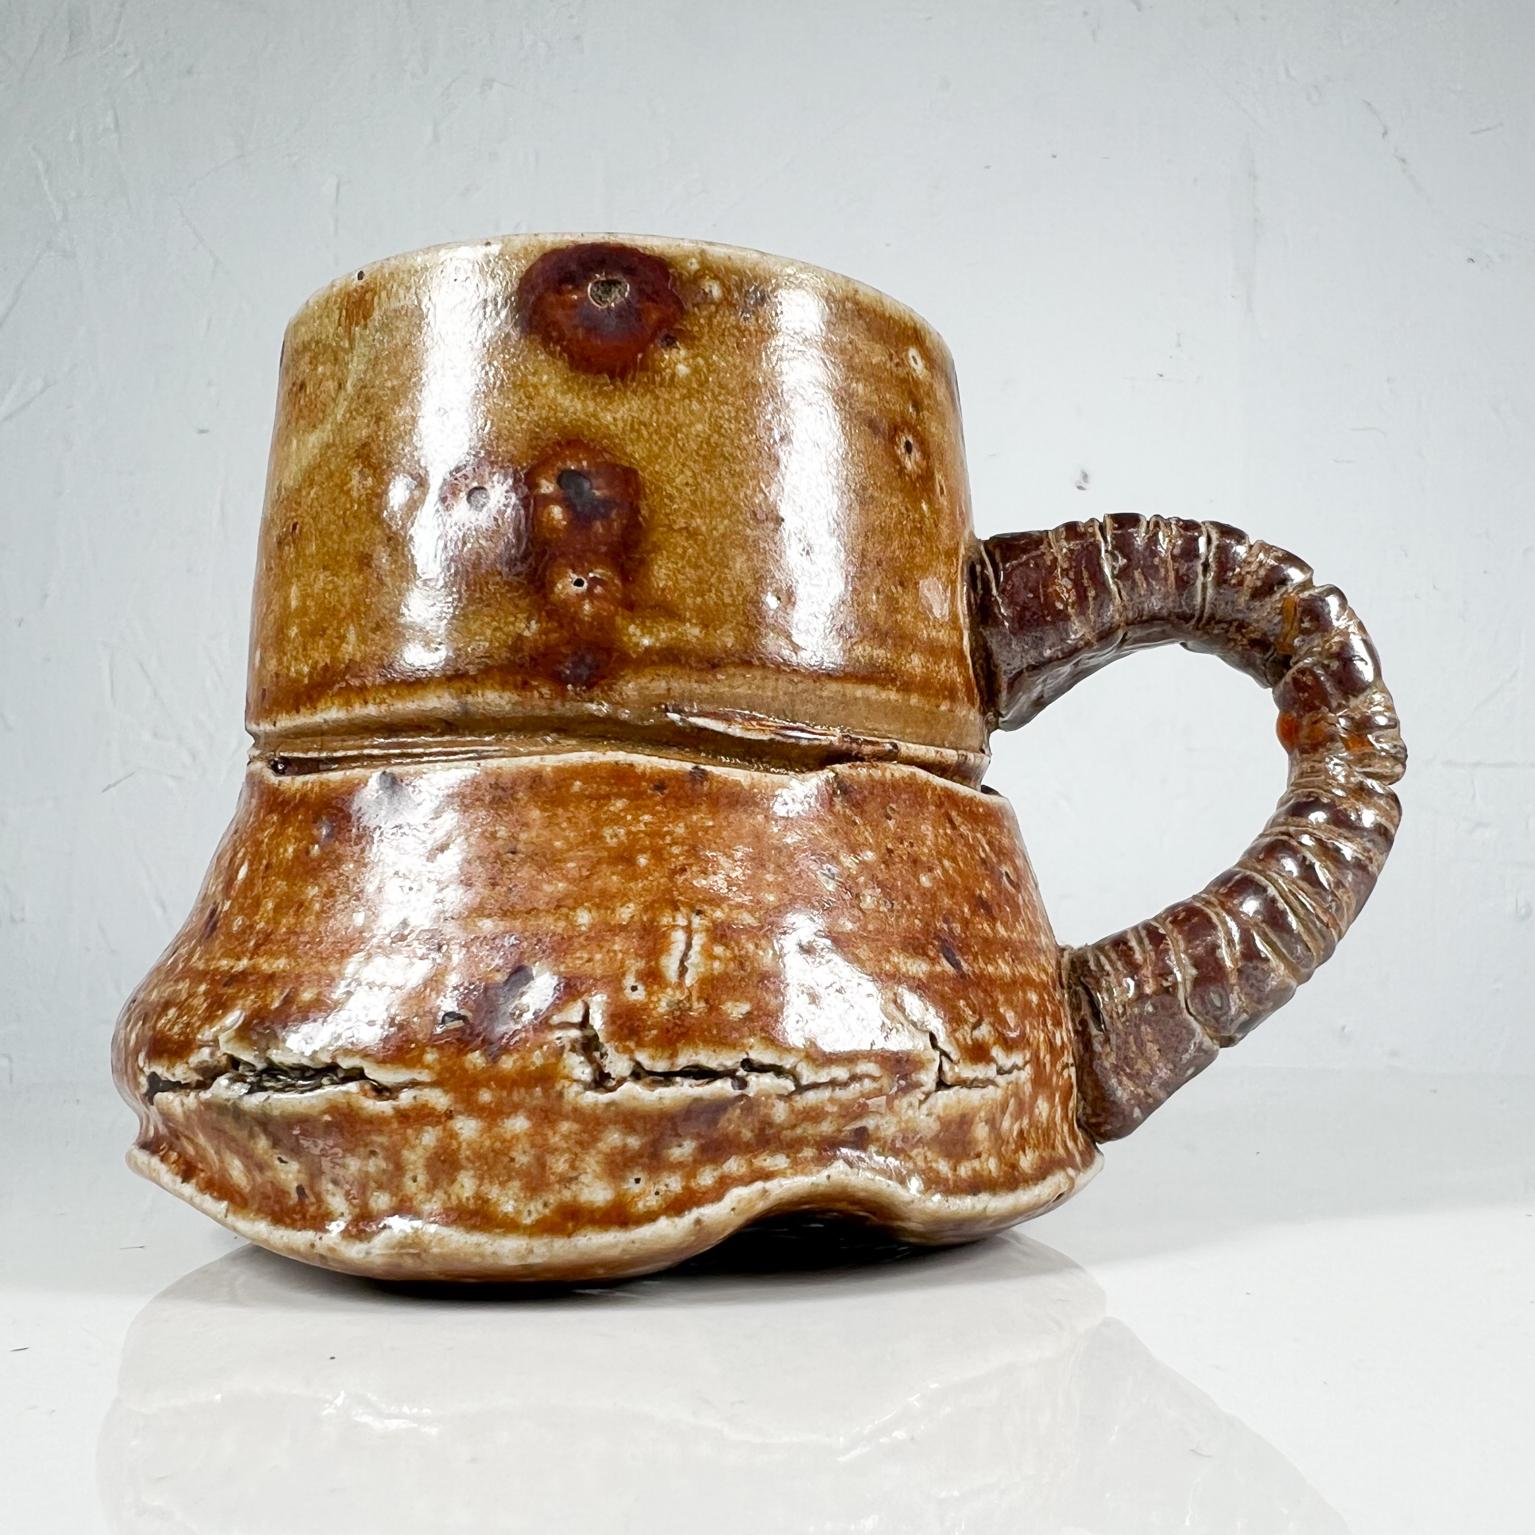 1980s Organic Modern Sculptural Light Brown Coffee Cup Mug Artisan Pottery In Good Condition For Sale In Chula Vista, CA